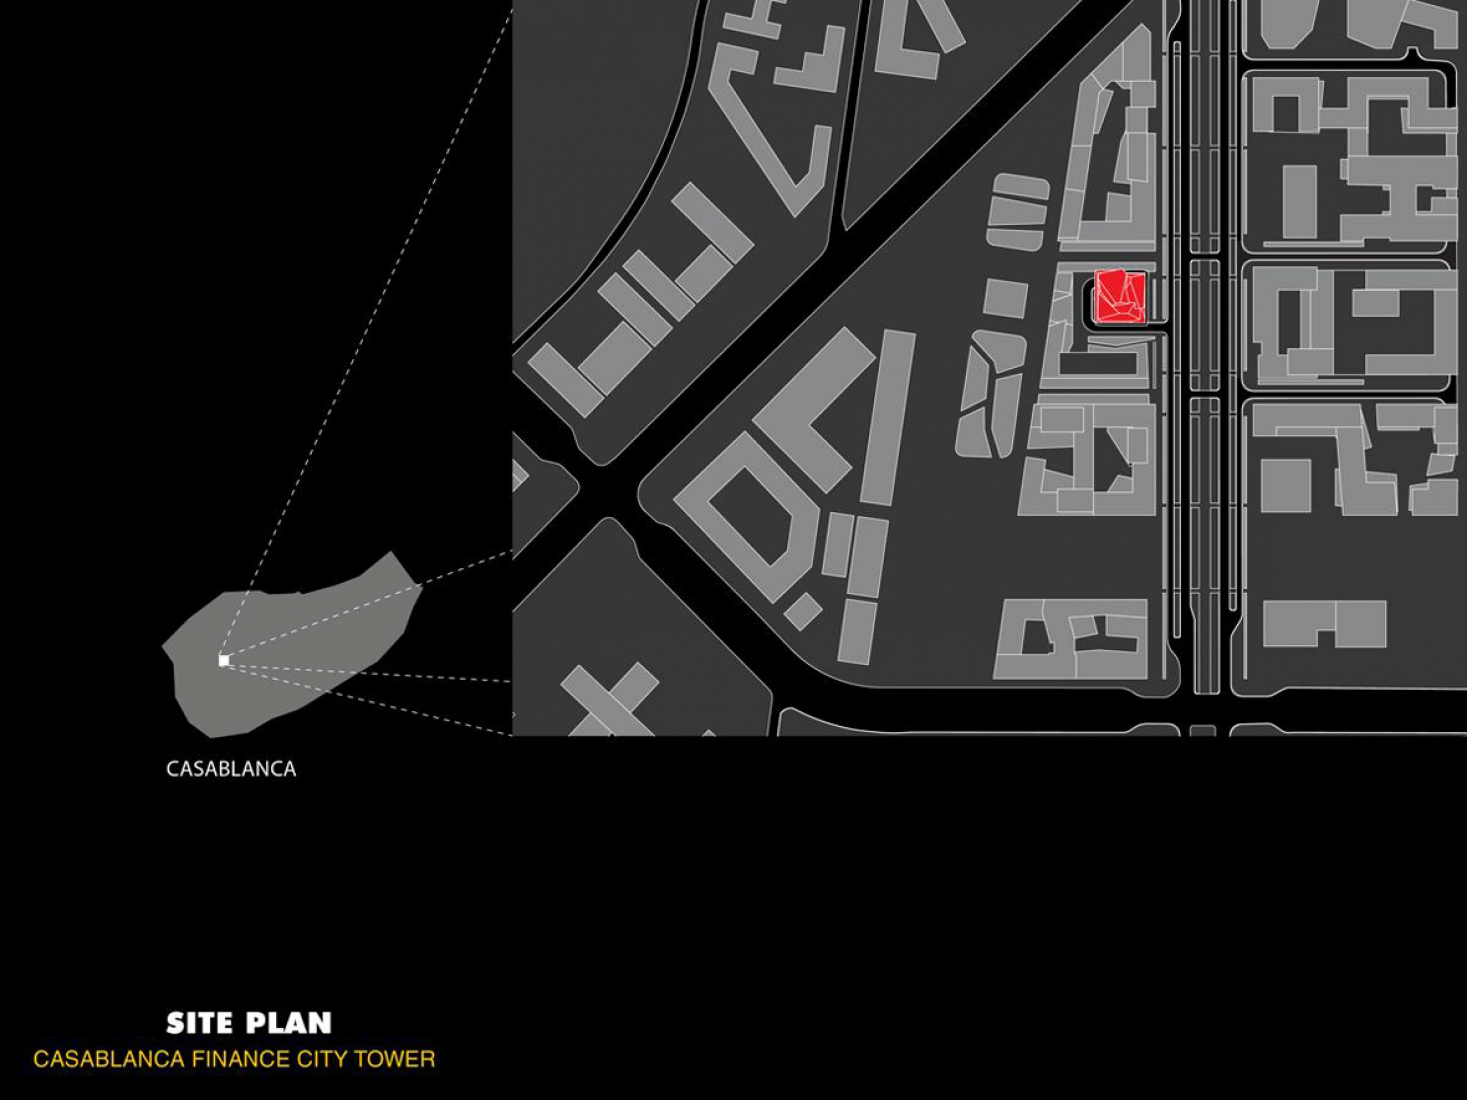 Site plan. Casablanca Finance City Tower by Morphosis. Image courtesy of Morphosis. 